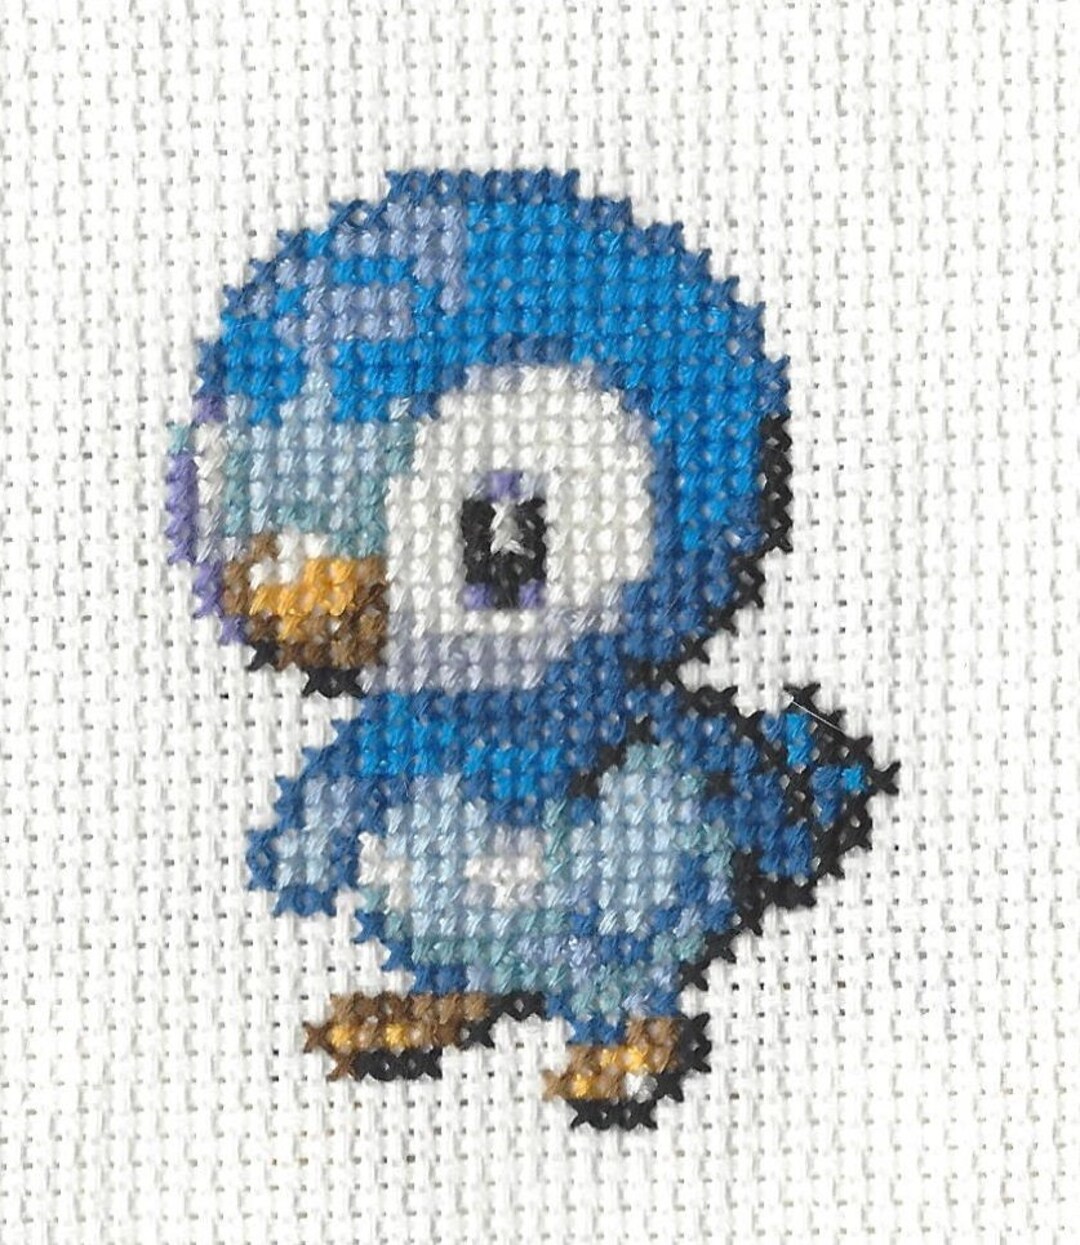 Pokémon Cross Stitch Kit: Includes patterns and materials to stitch Pikachu  & Piplup, & Evee, and charts for 16 other Pokémon projects - Book Mark